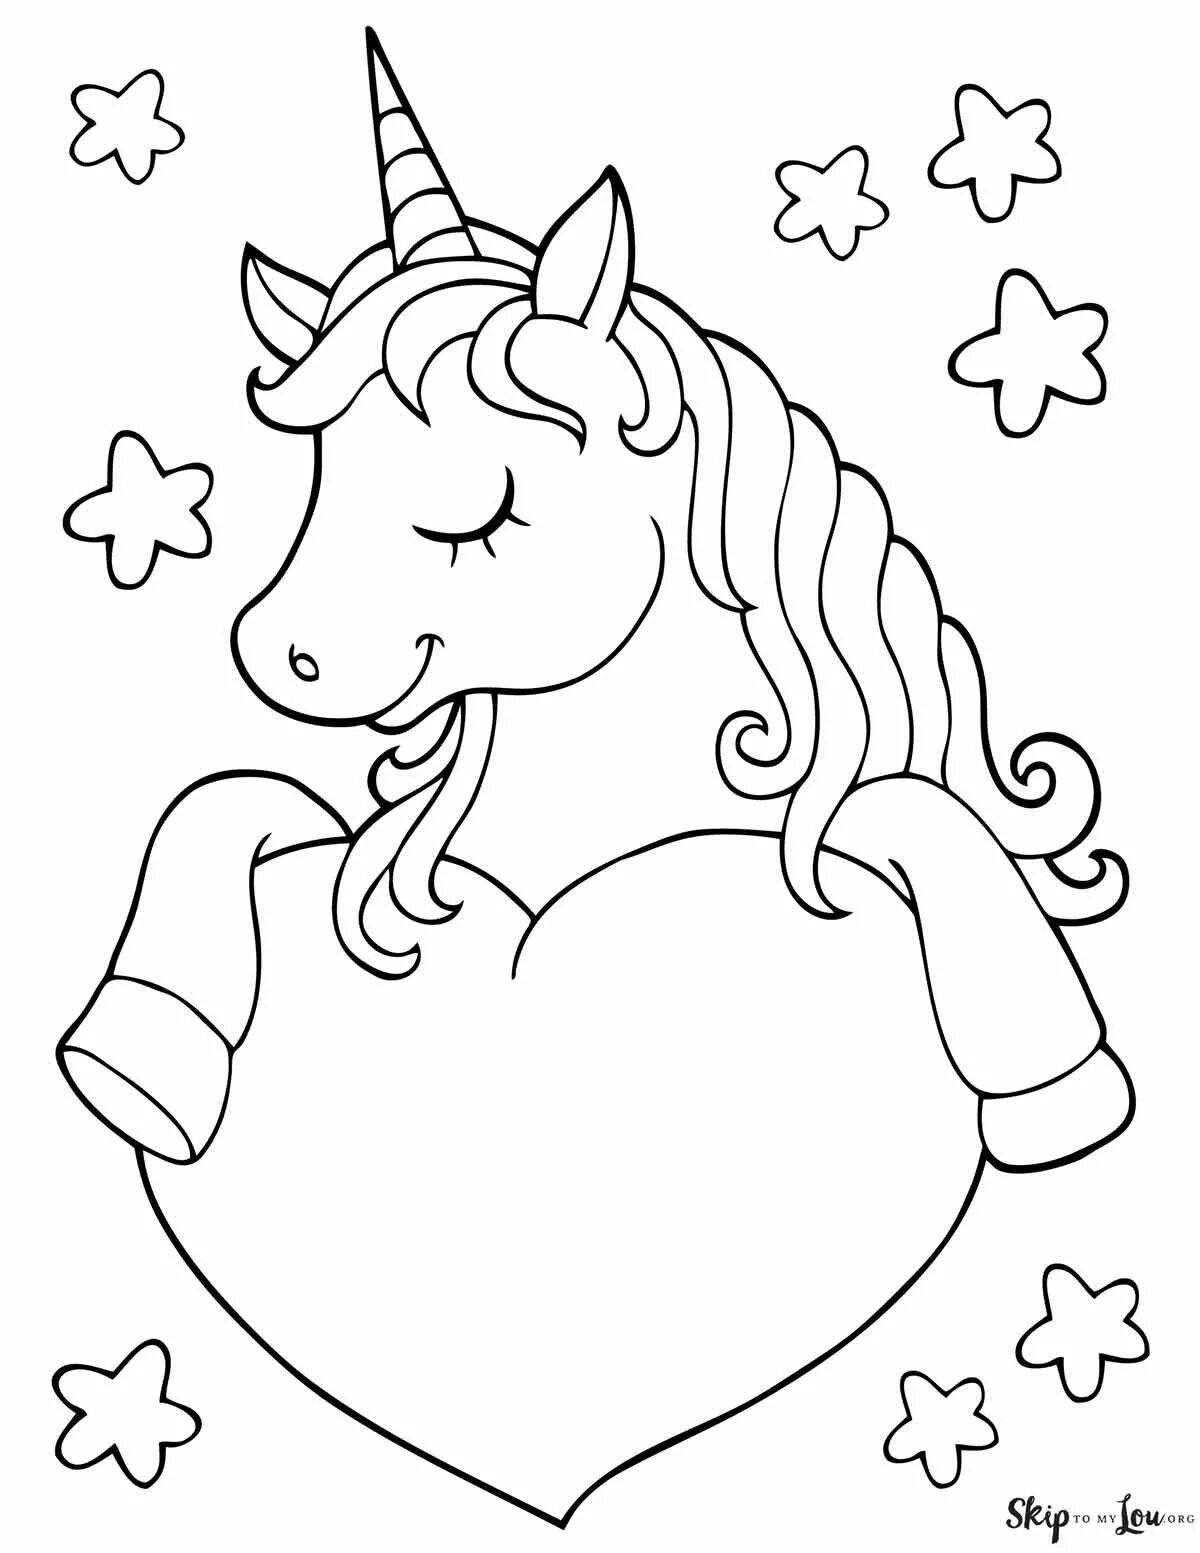 Awesome unicorn girl coloring book